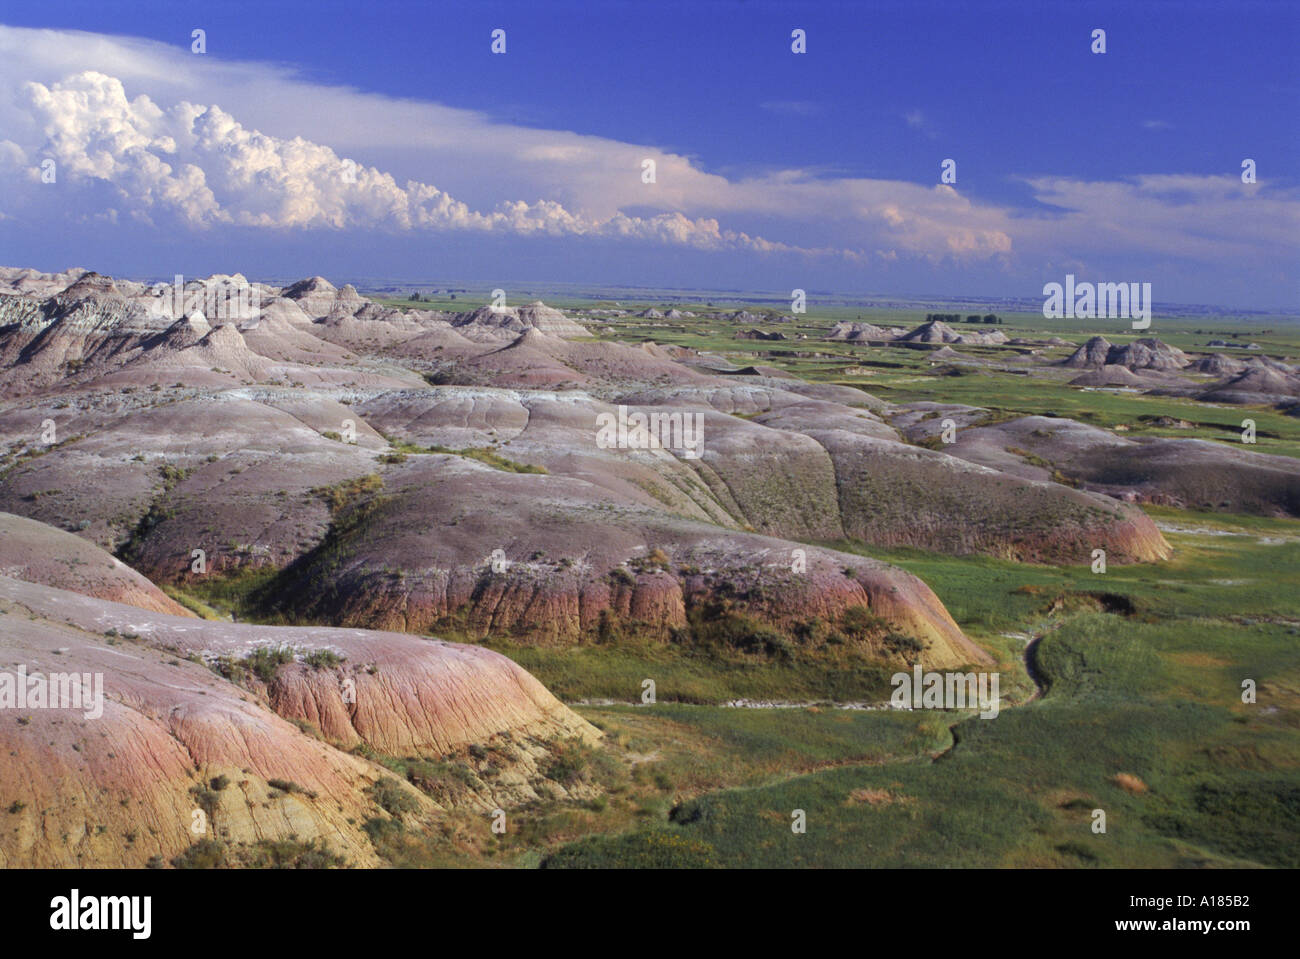 Gullies eroded into the Pierre shales below Loop Road in the Sage Creek wilderness in the Badlands National Park South Dakota Stock Photo